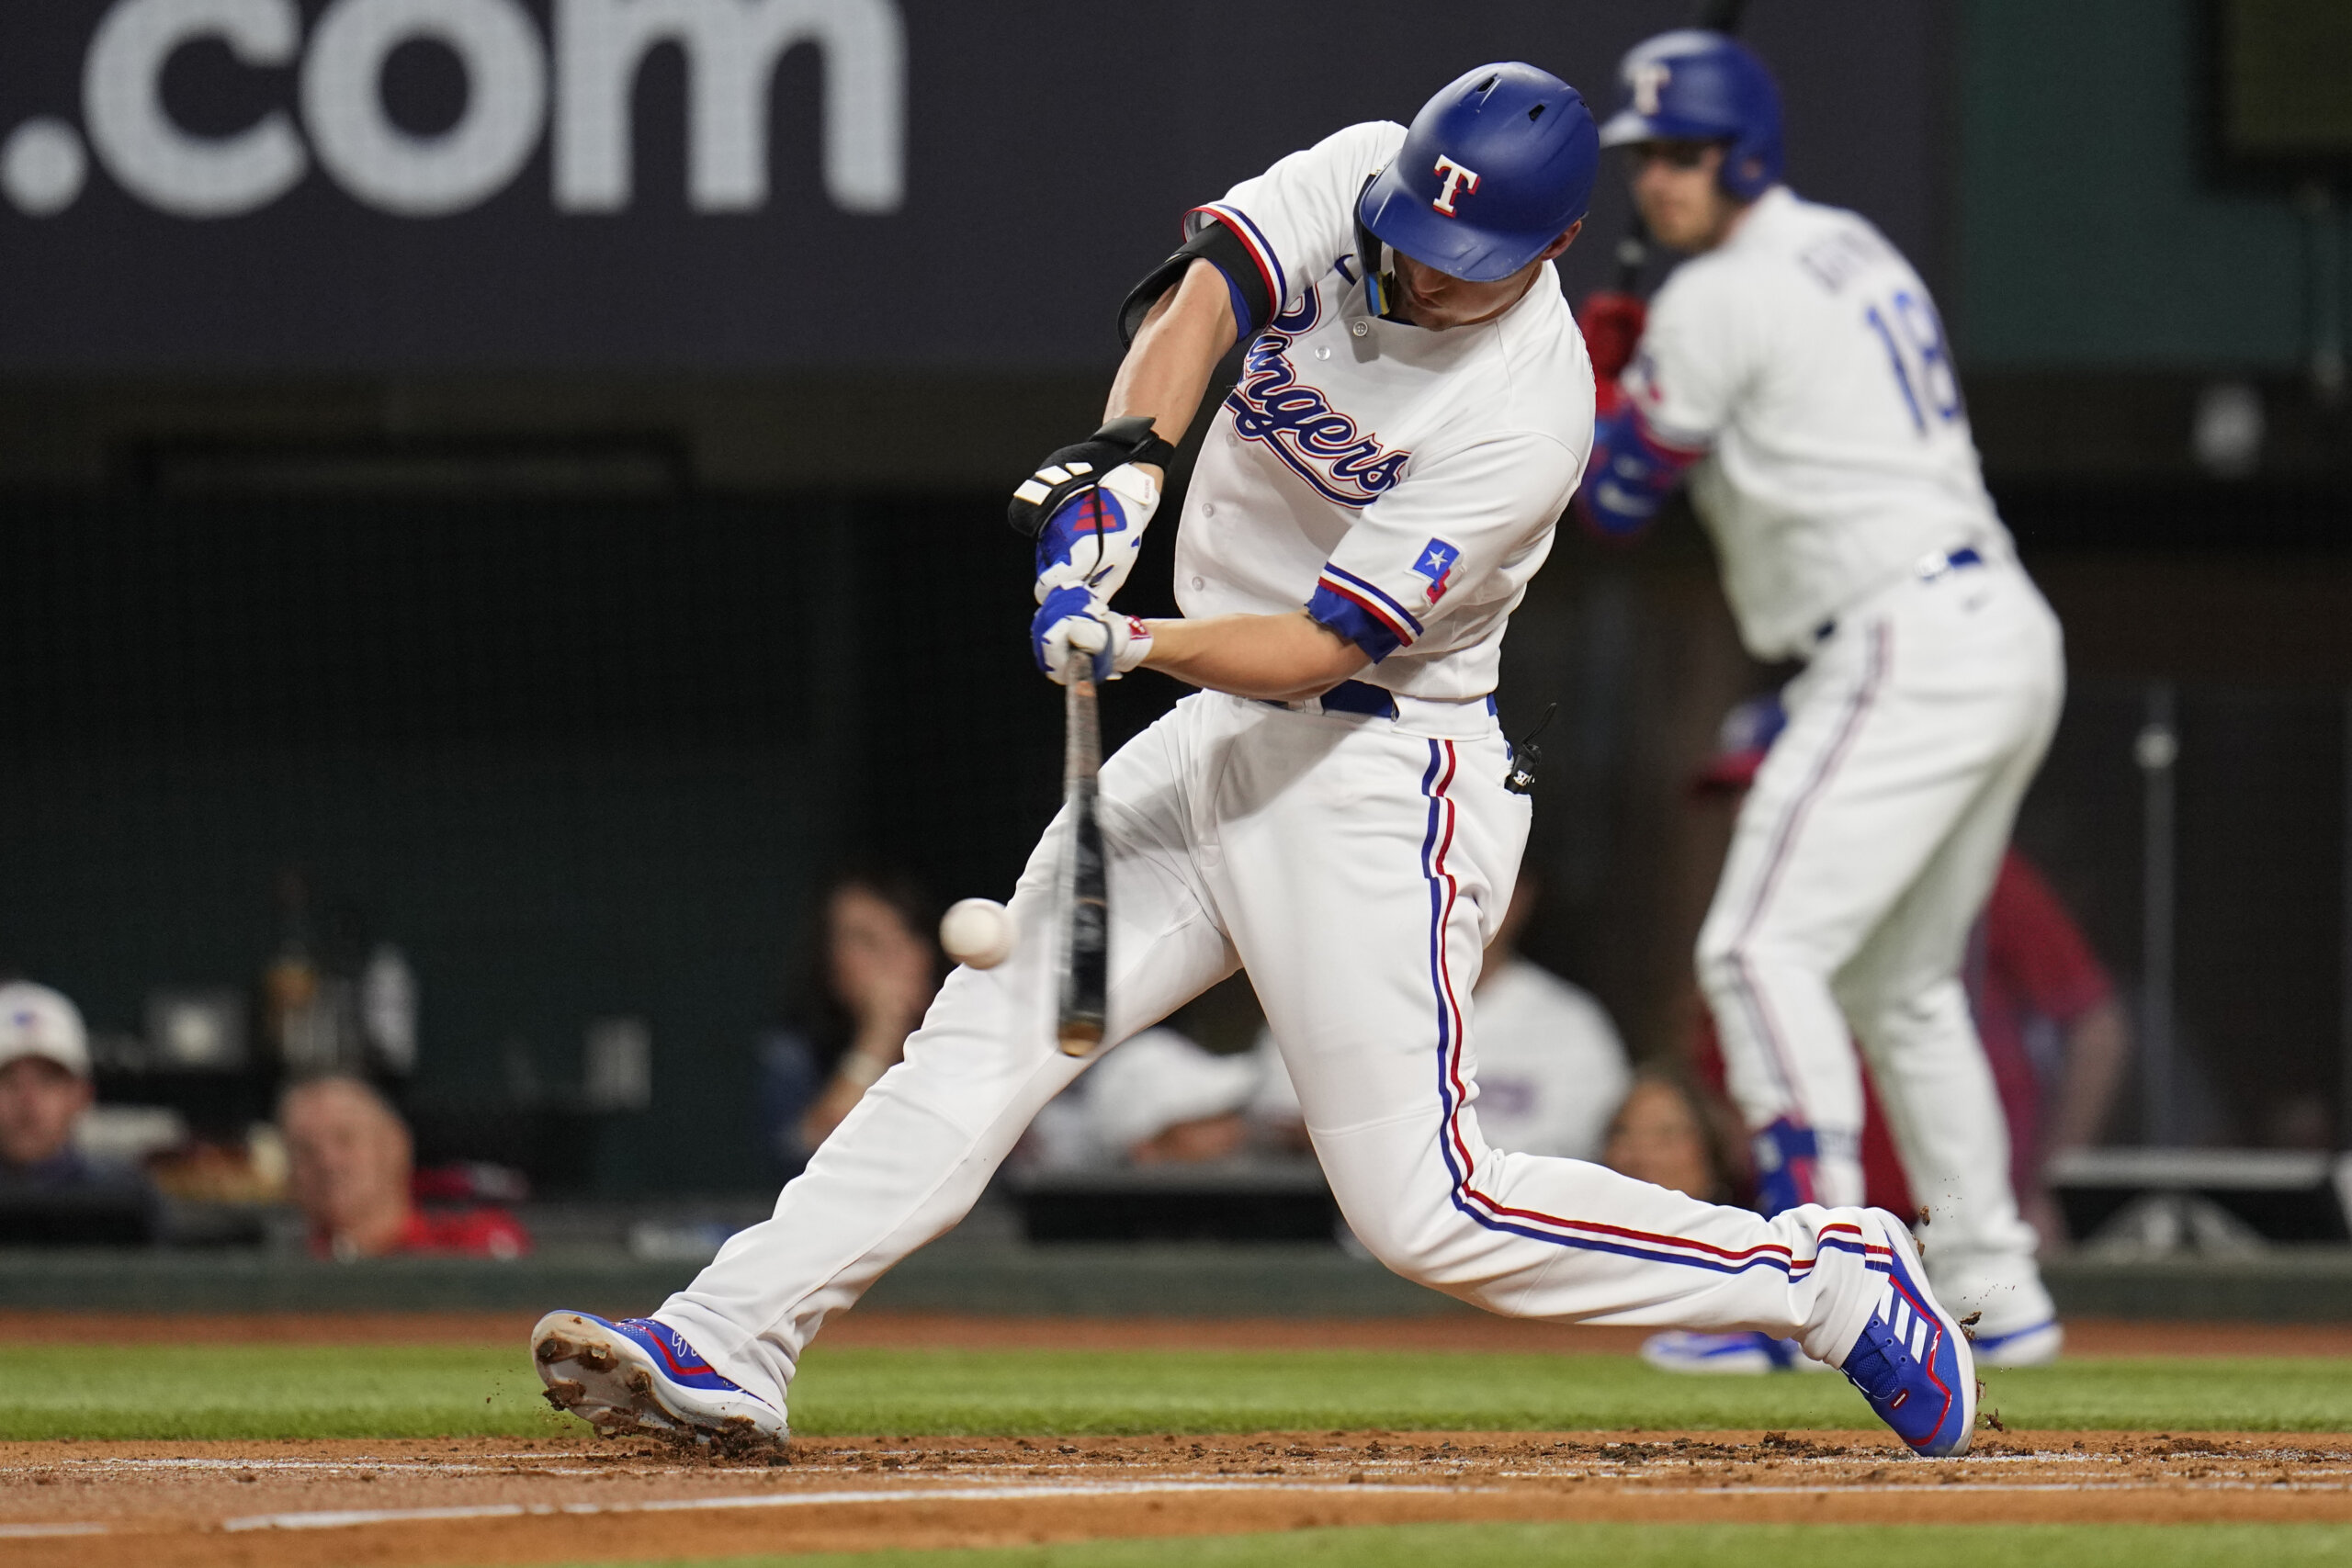 Corey Seager homers twice for Rangers in victory over Royals